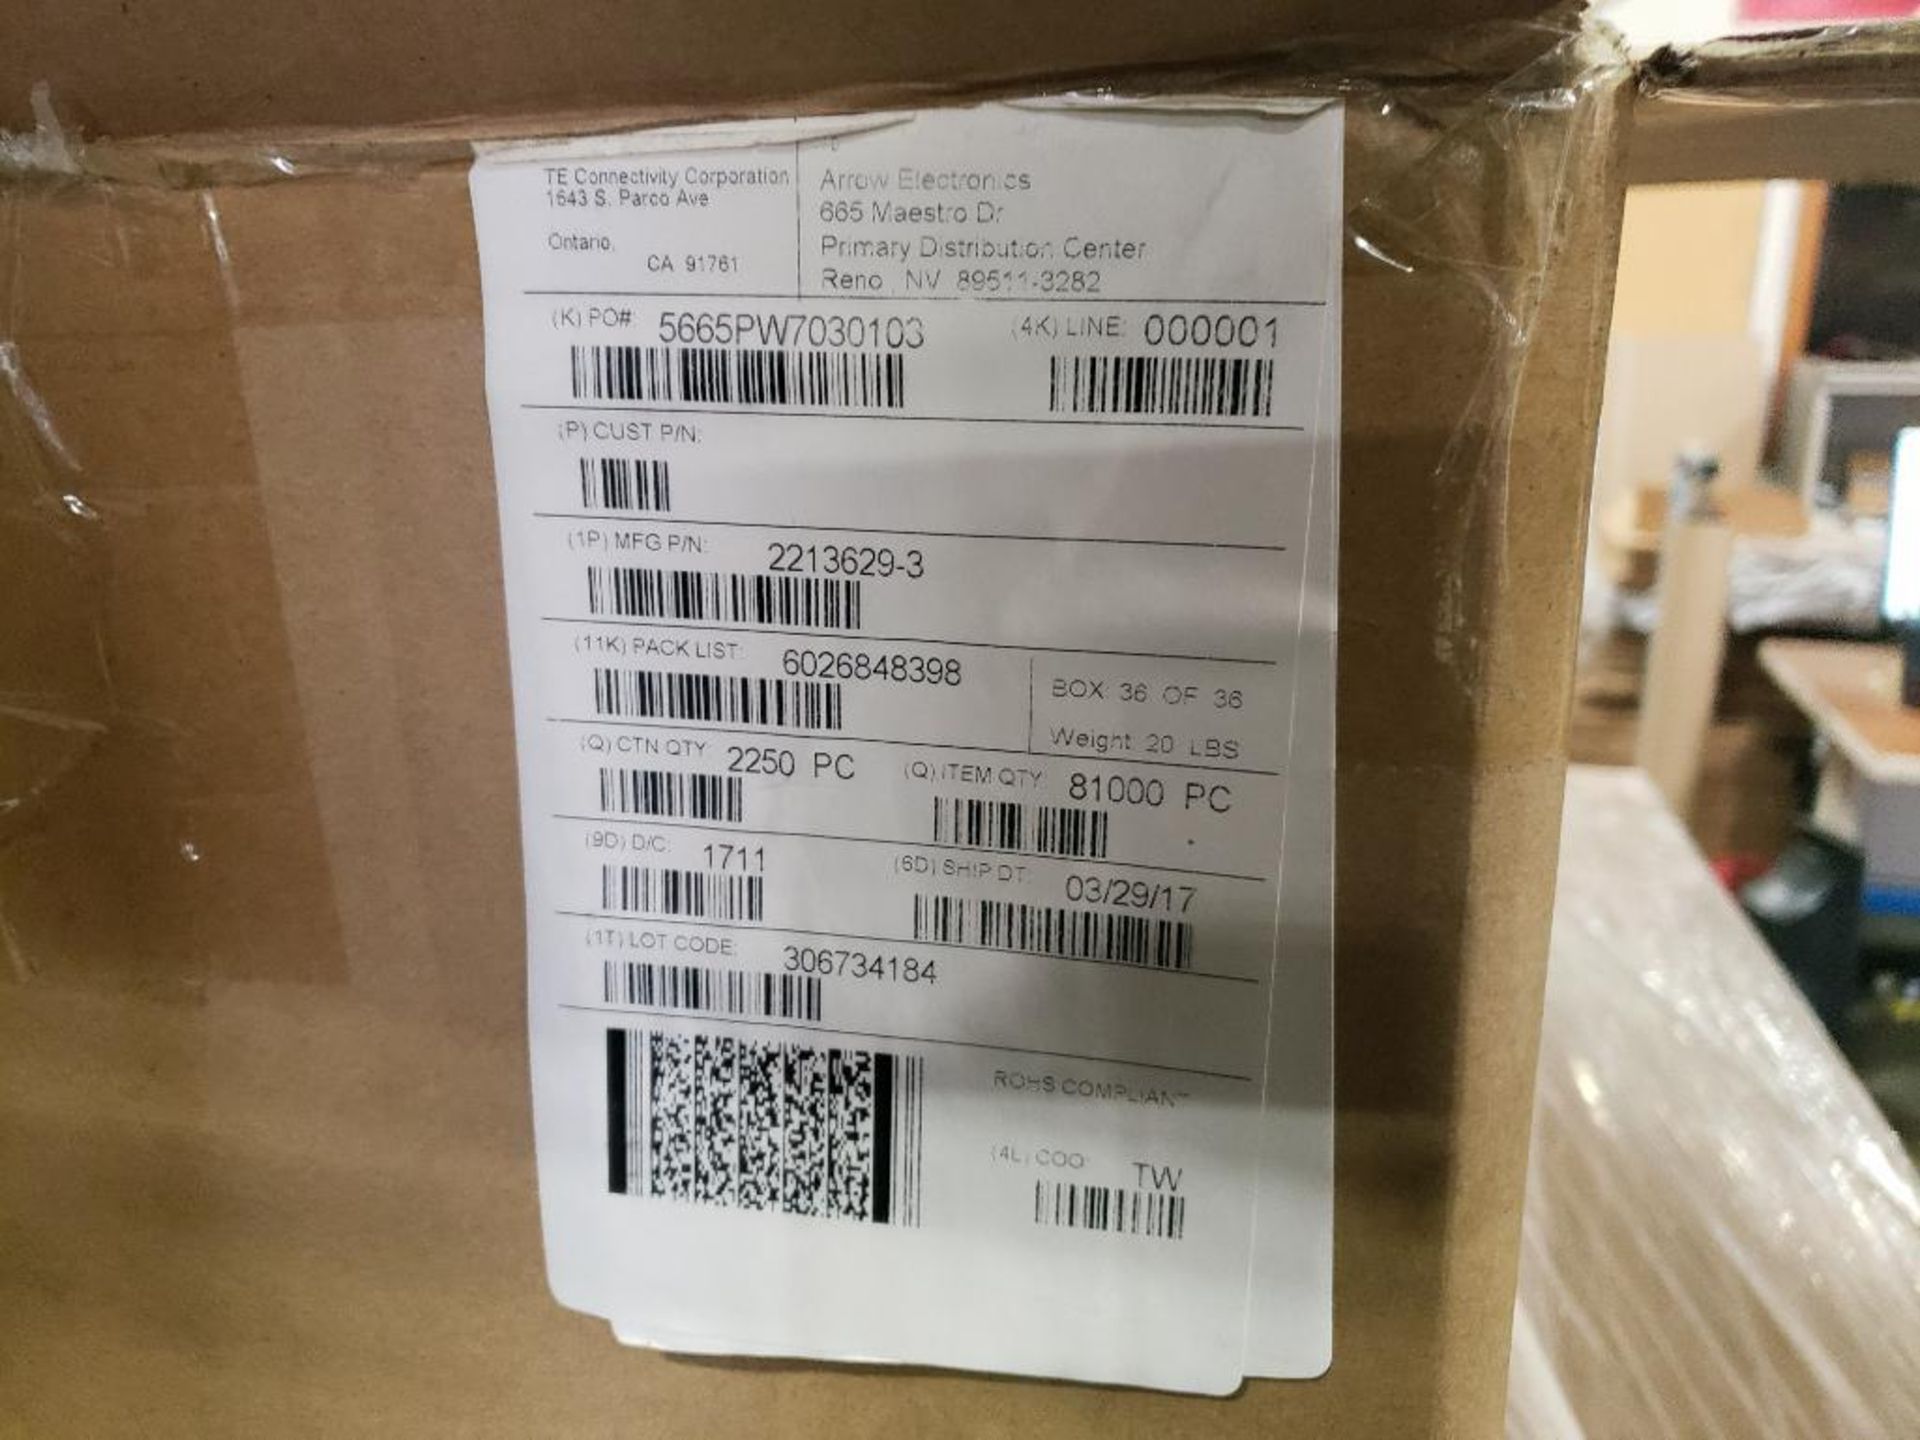 Qty 9000 - TE Connectivity part number 2213629-3. (4 bulk boxes of 9 reels) - Image 12 of 12